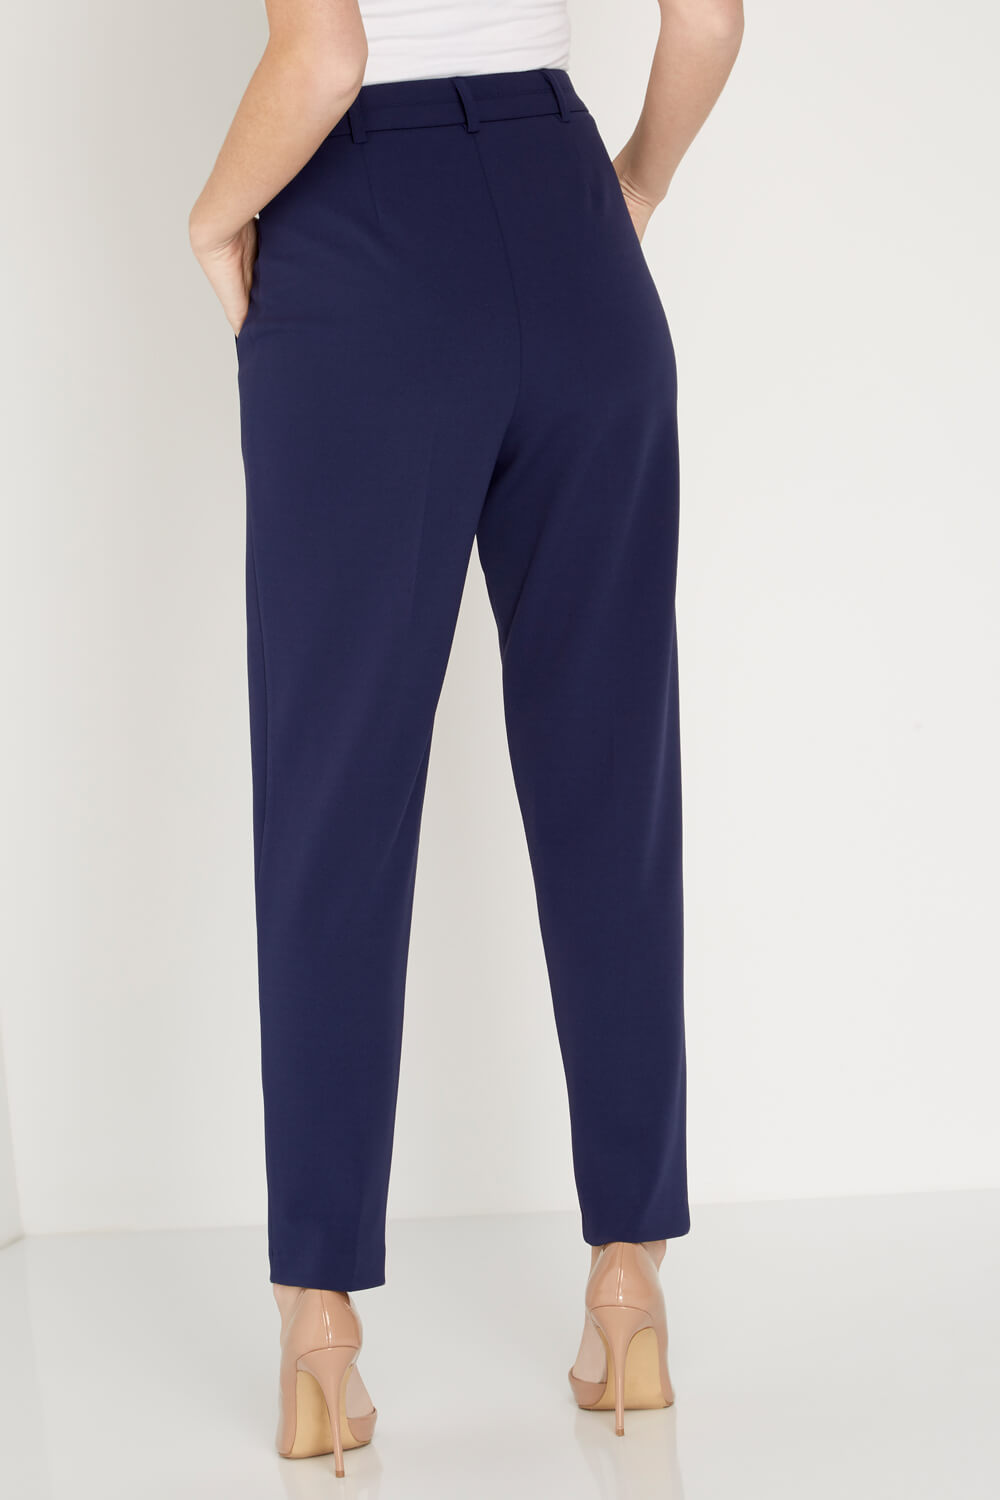 Navy  Tailored Pleated Trouser, Image 3 of 5